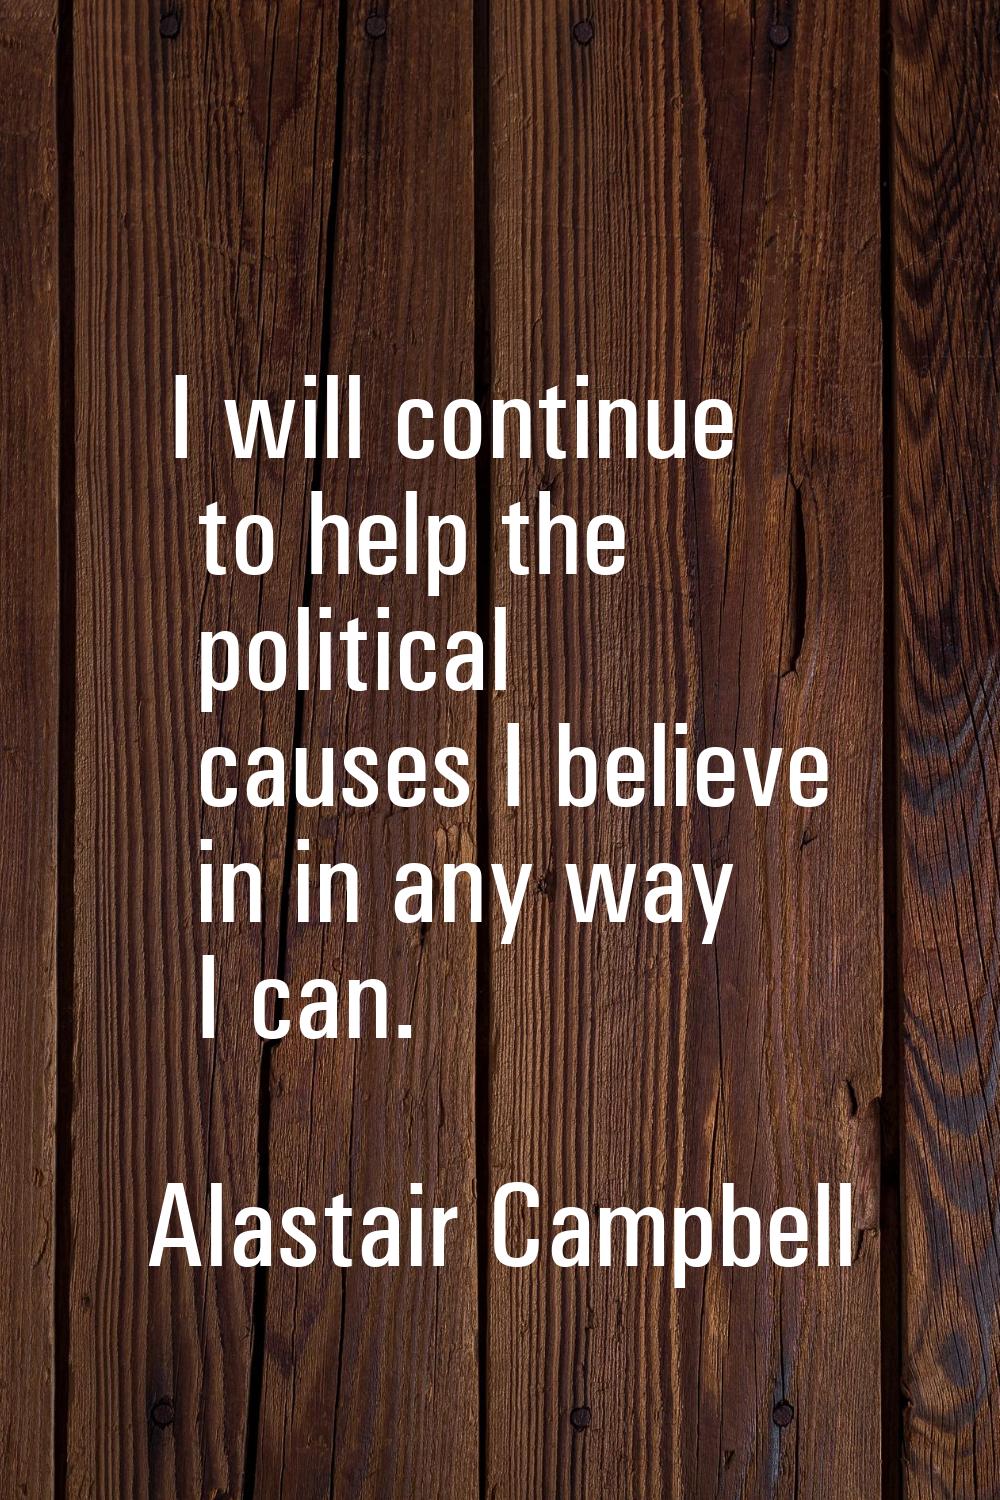 I will continue to help the political causes I believe in in any way I can.